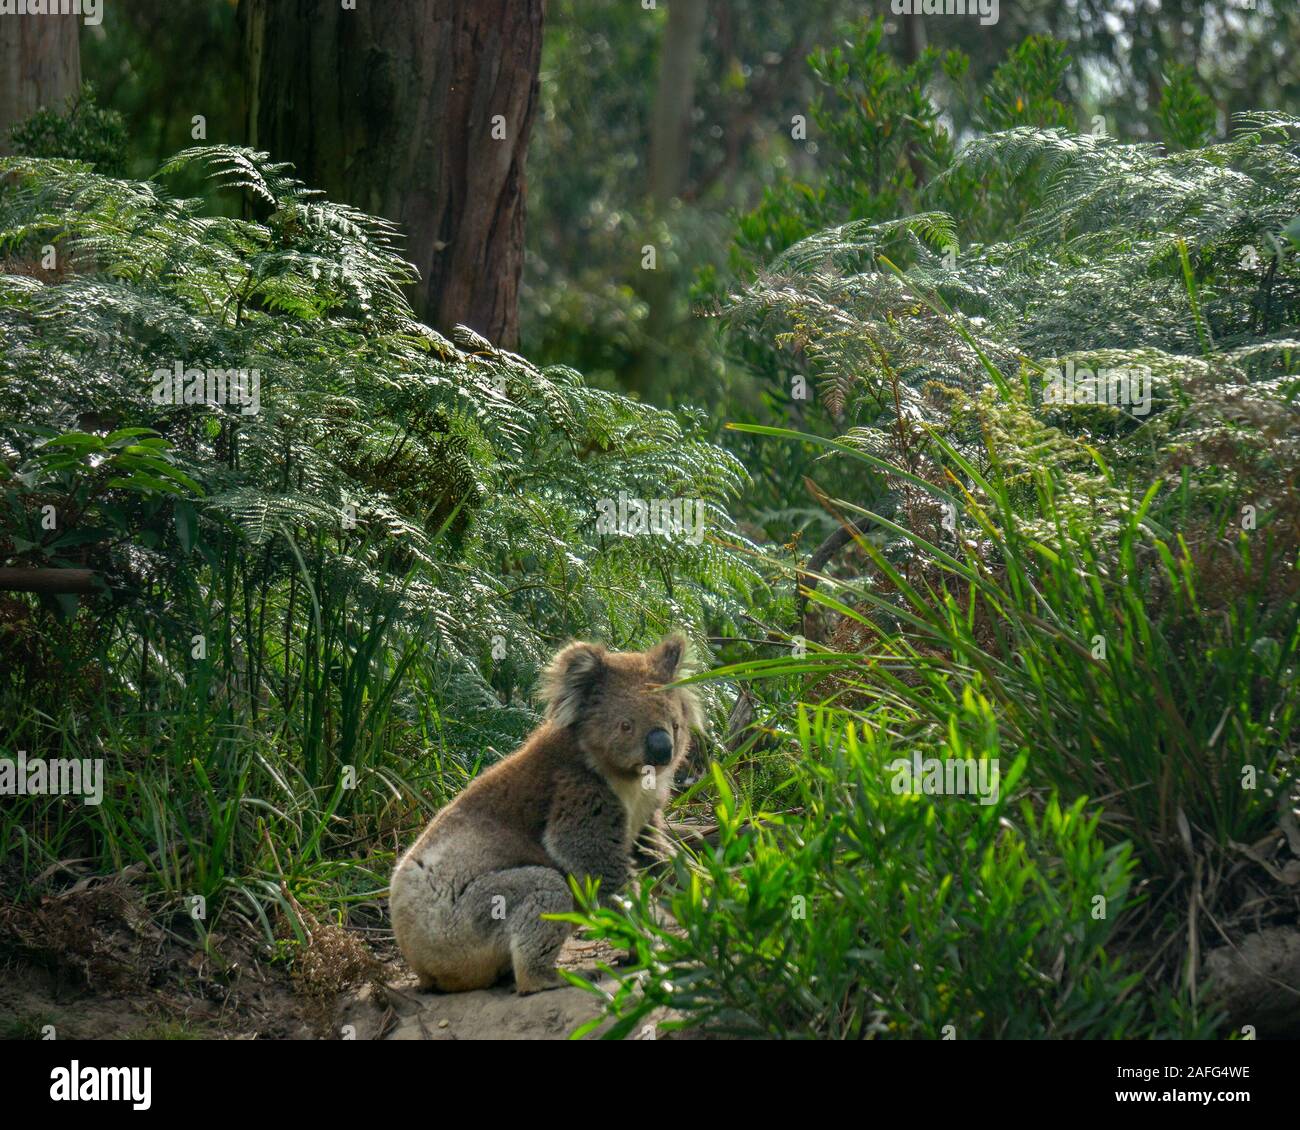 A koala (Phascolarctos cinereus) sits on the ground in lush green coastal bush forest at Kennett River along the Great Ocean Road near the Otways in Victoria, Australia Stock Photo